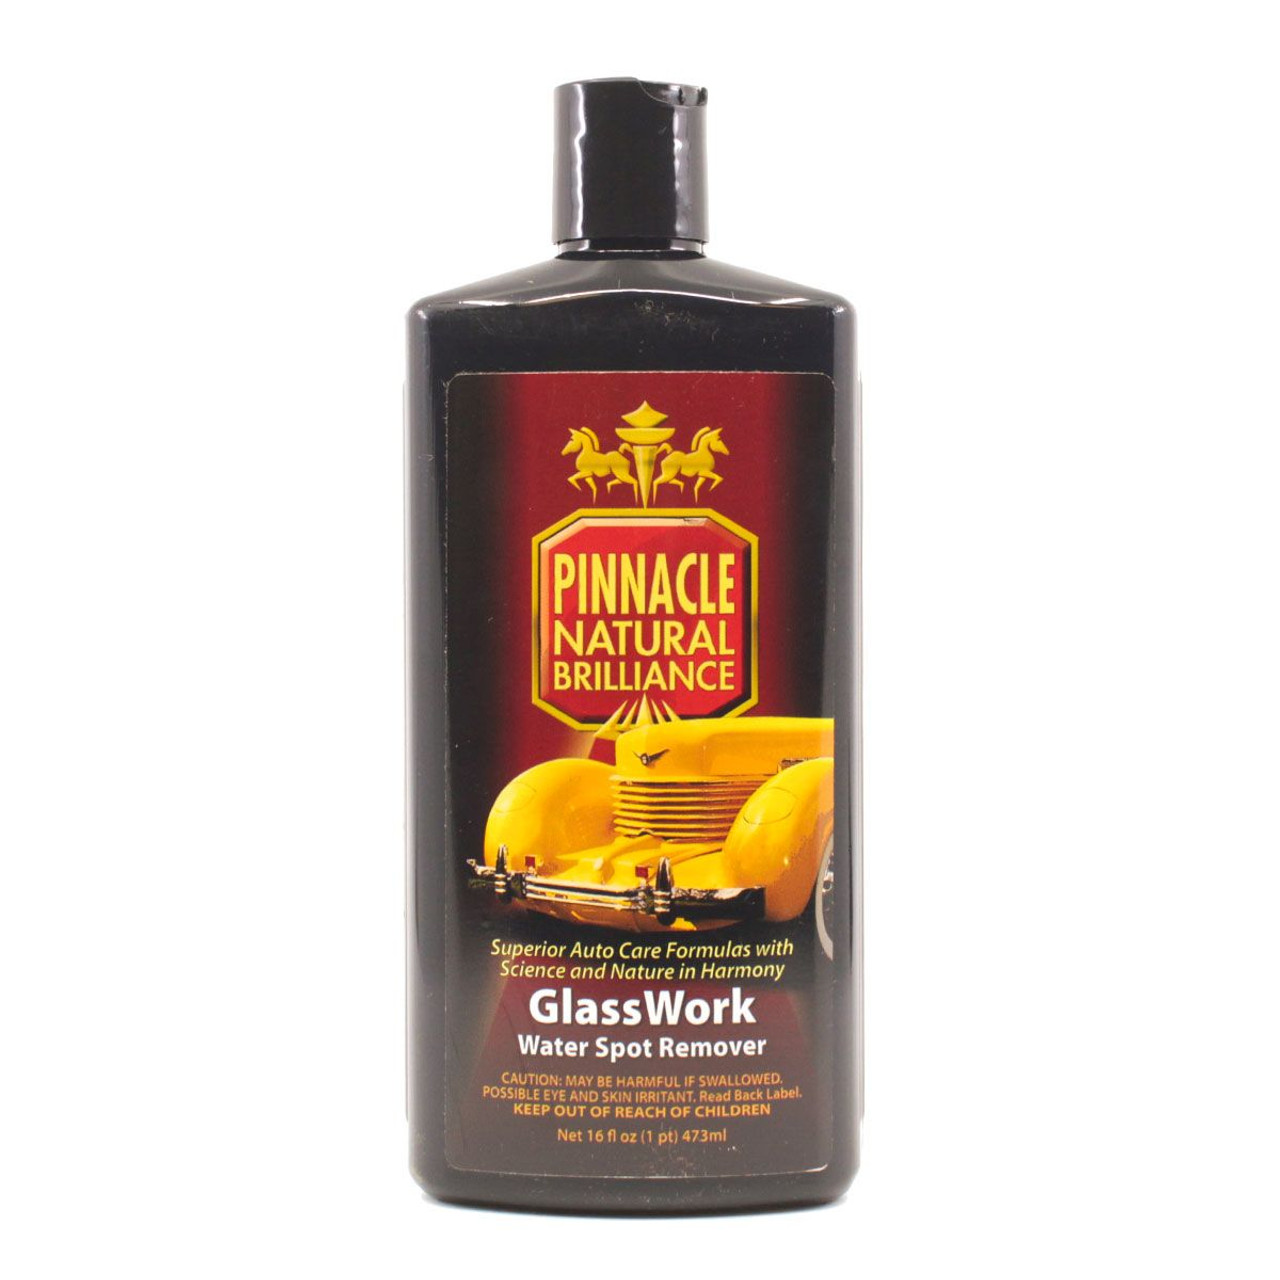 Pinnacle GlassWork Water Spot Remover, hard water spot remover